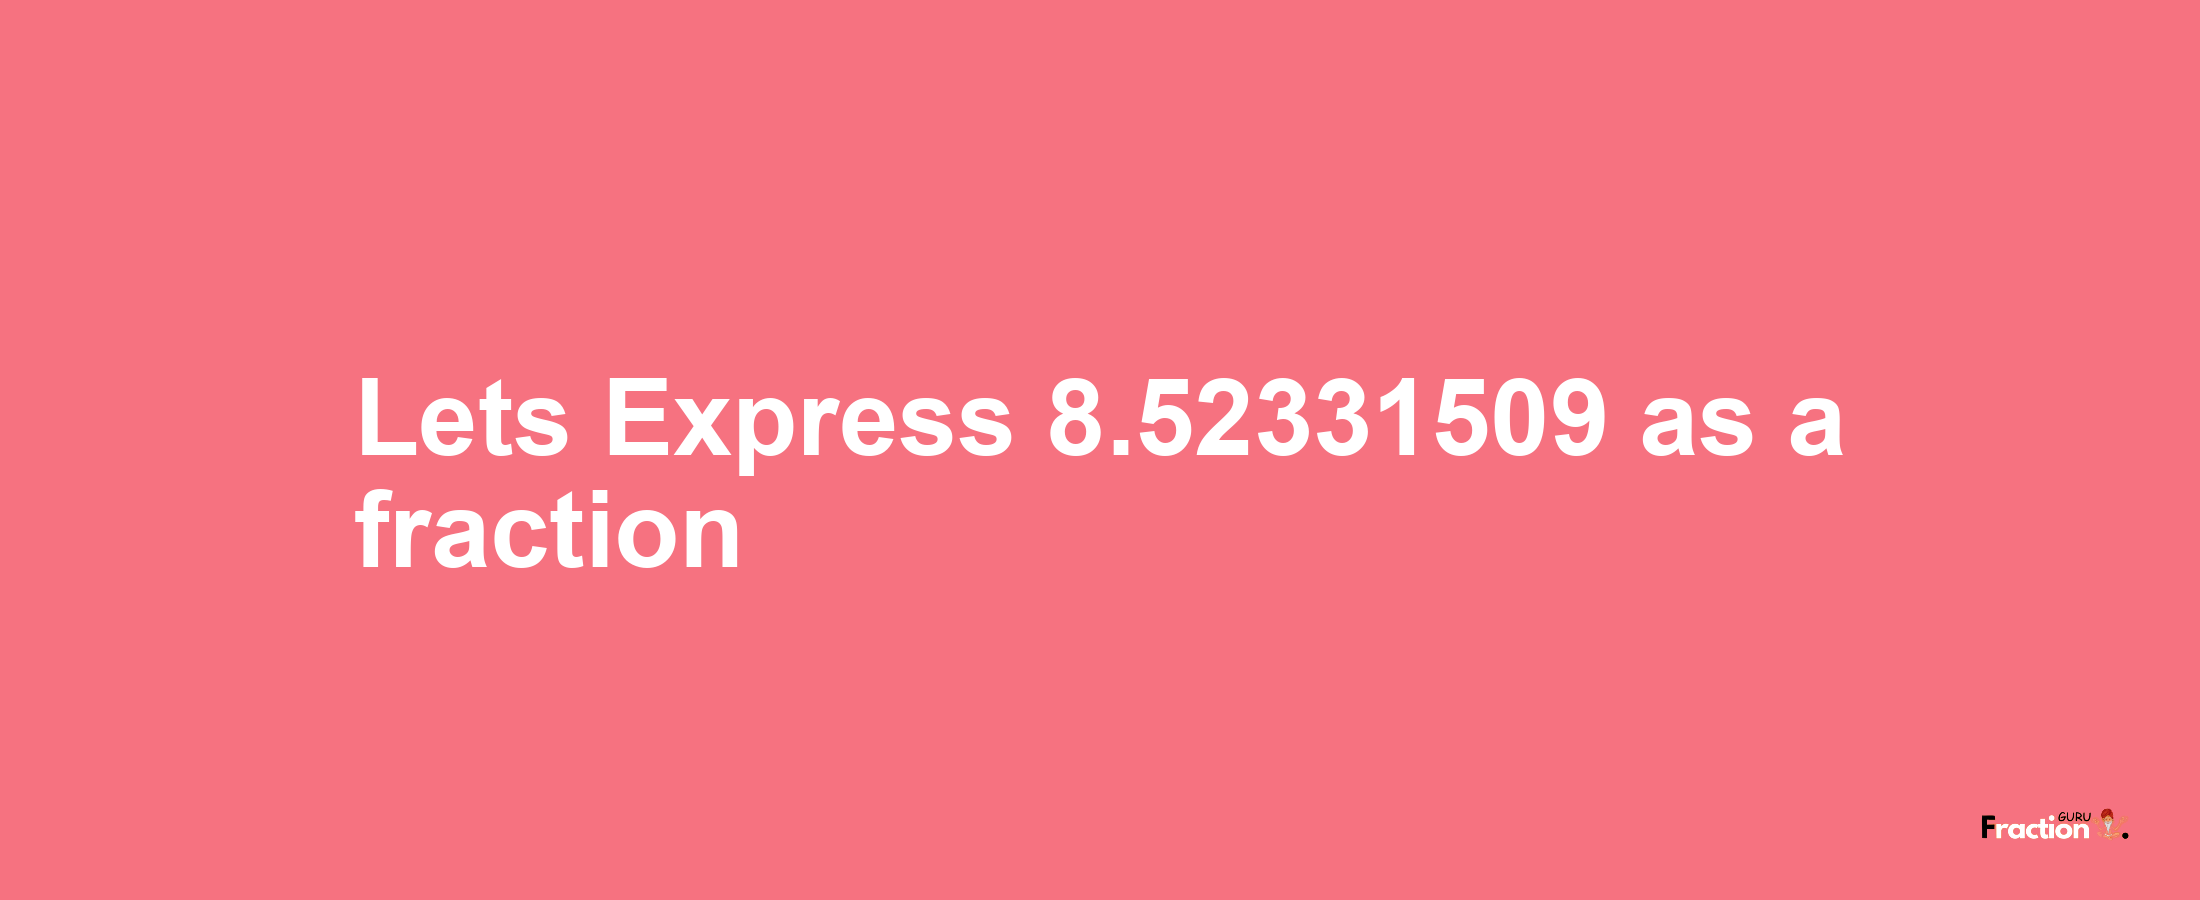 Lets Express 8.52331509 as afraction